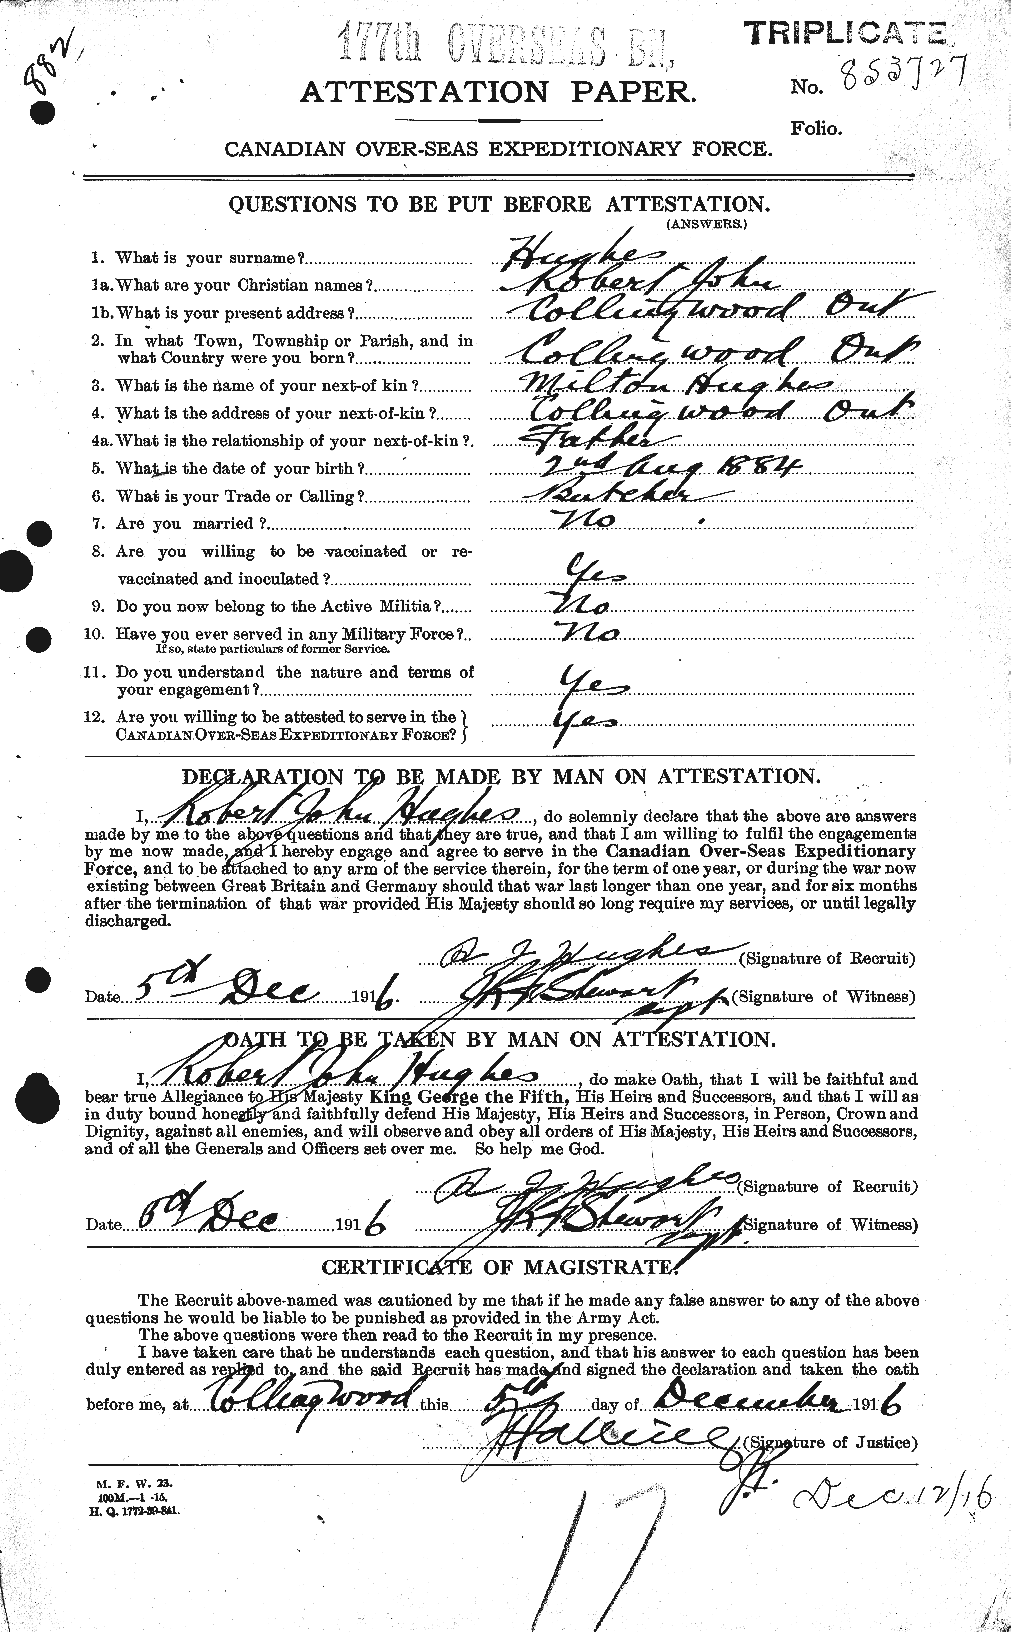 Personnel Records of the First World War - CEF 406614a